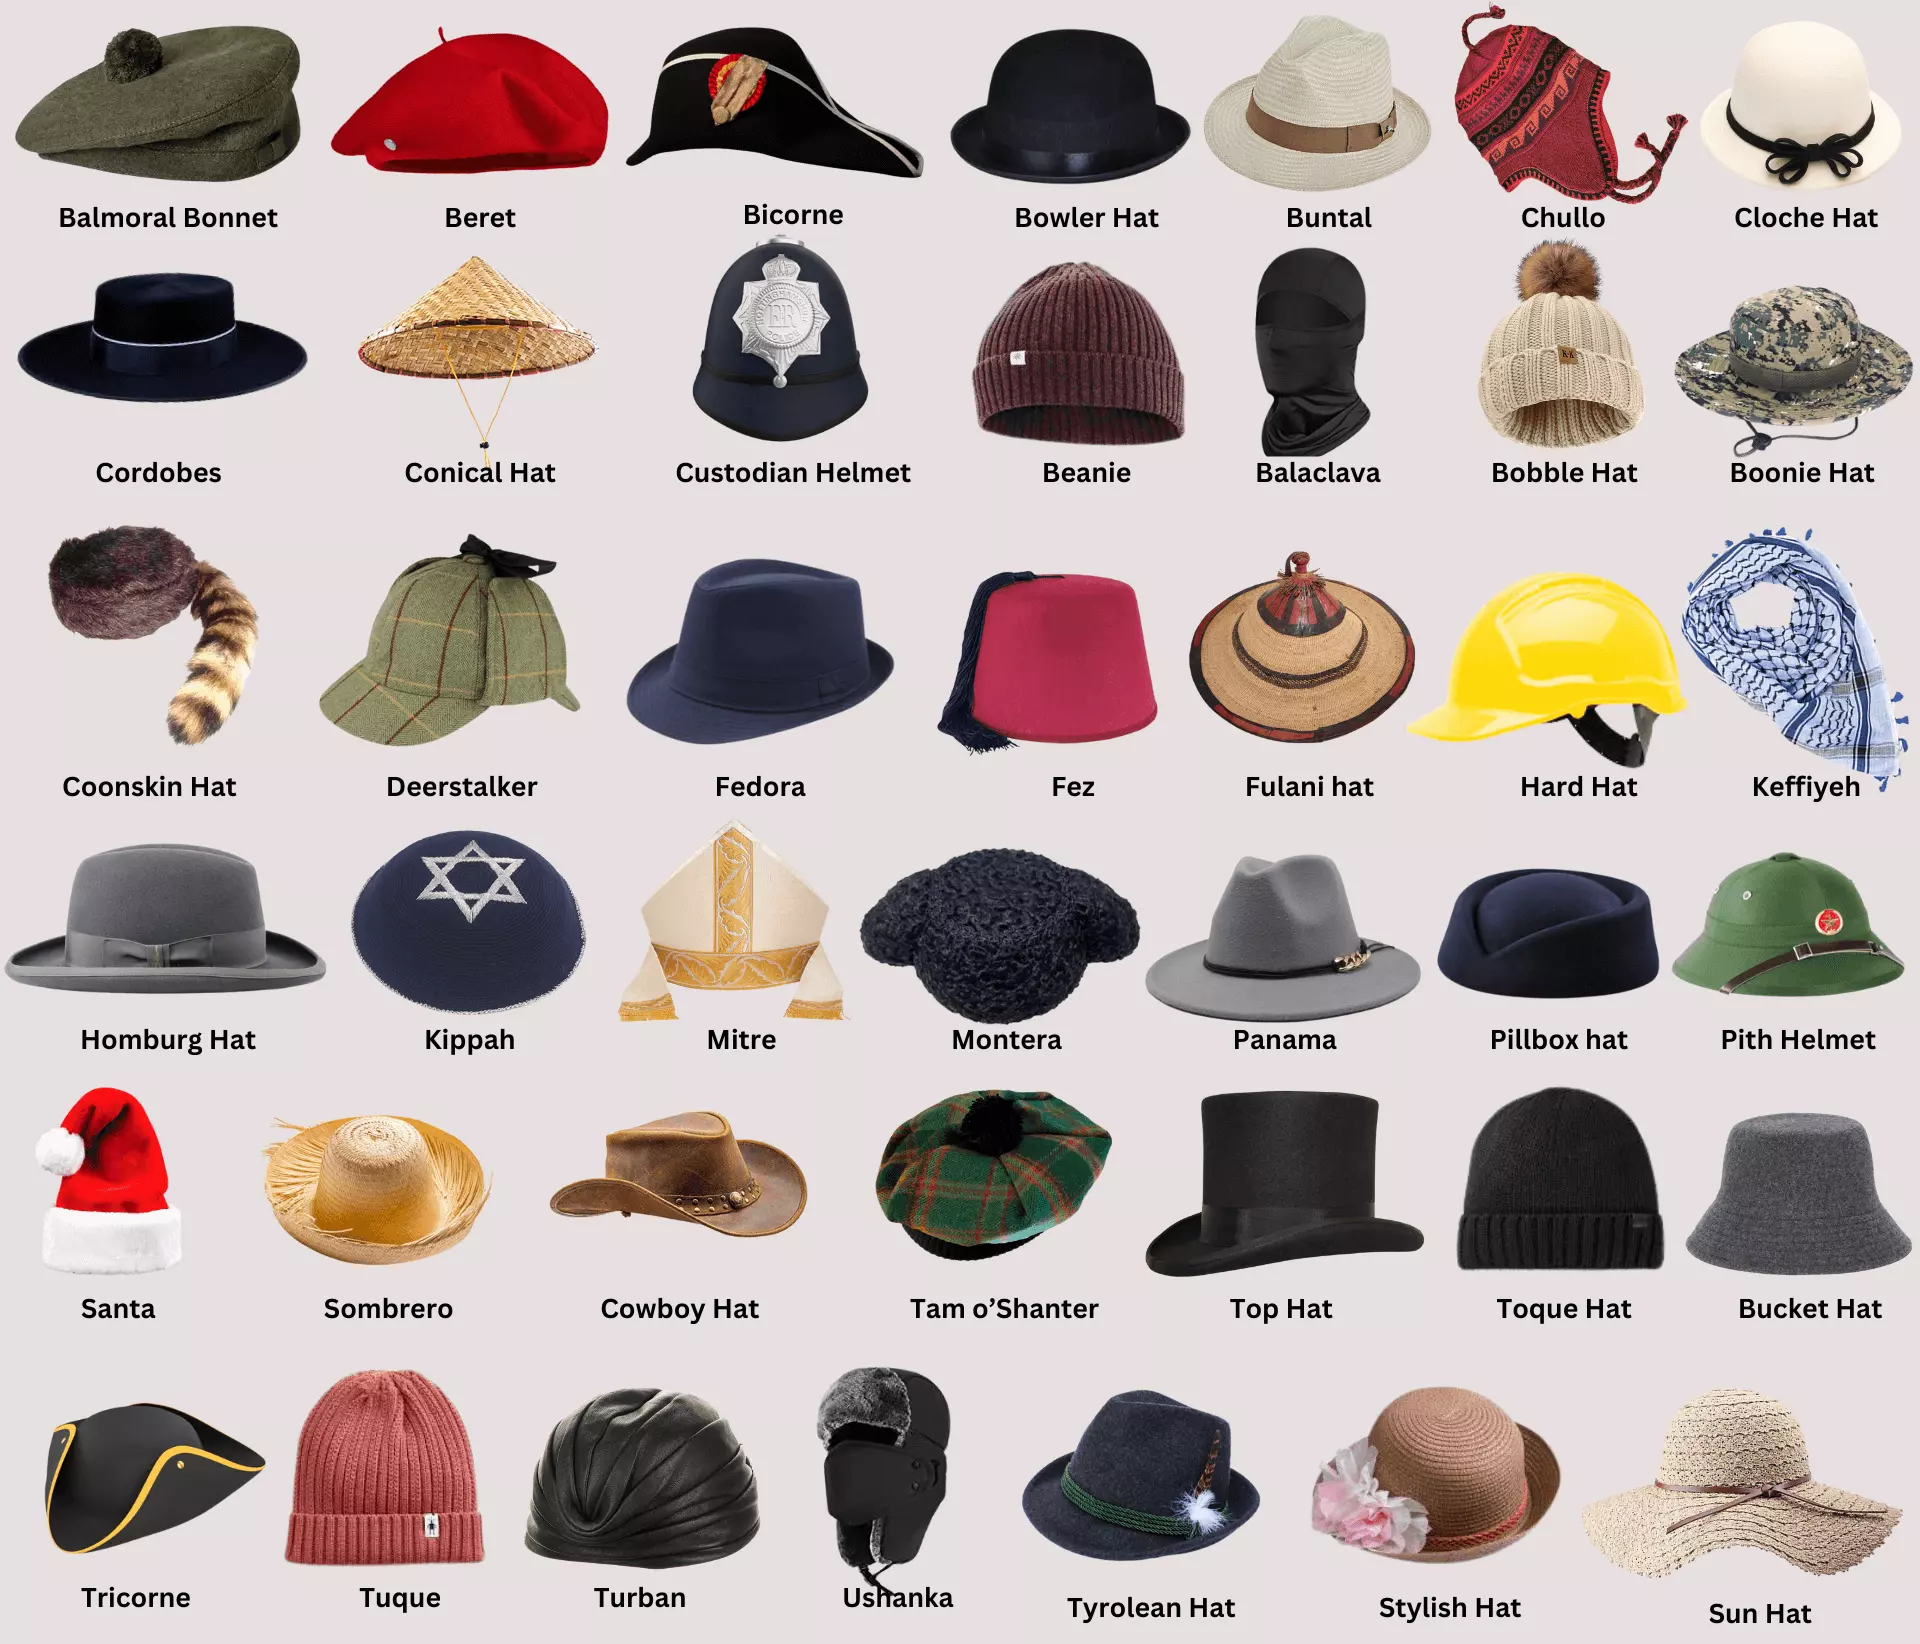 More than 100+ Different Styles of Hats and Caps: Explained with Pictures